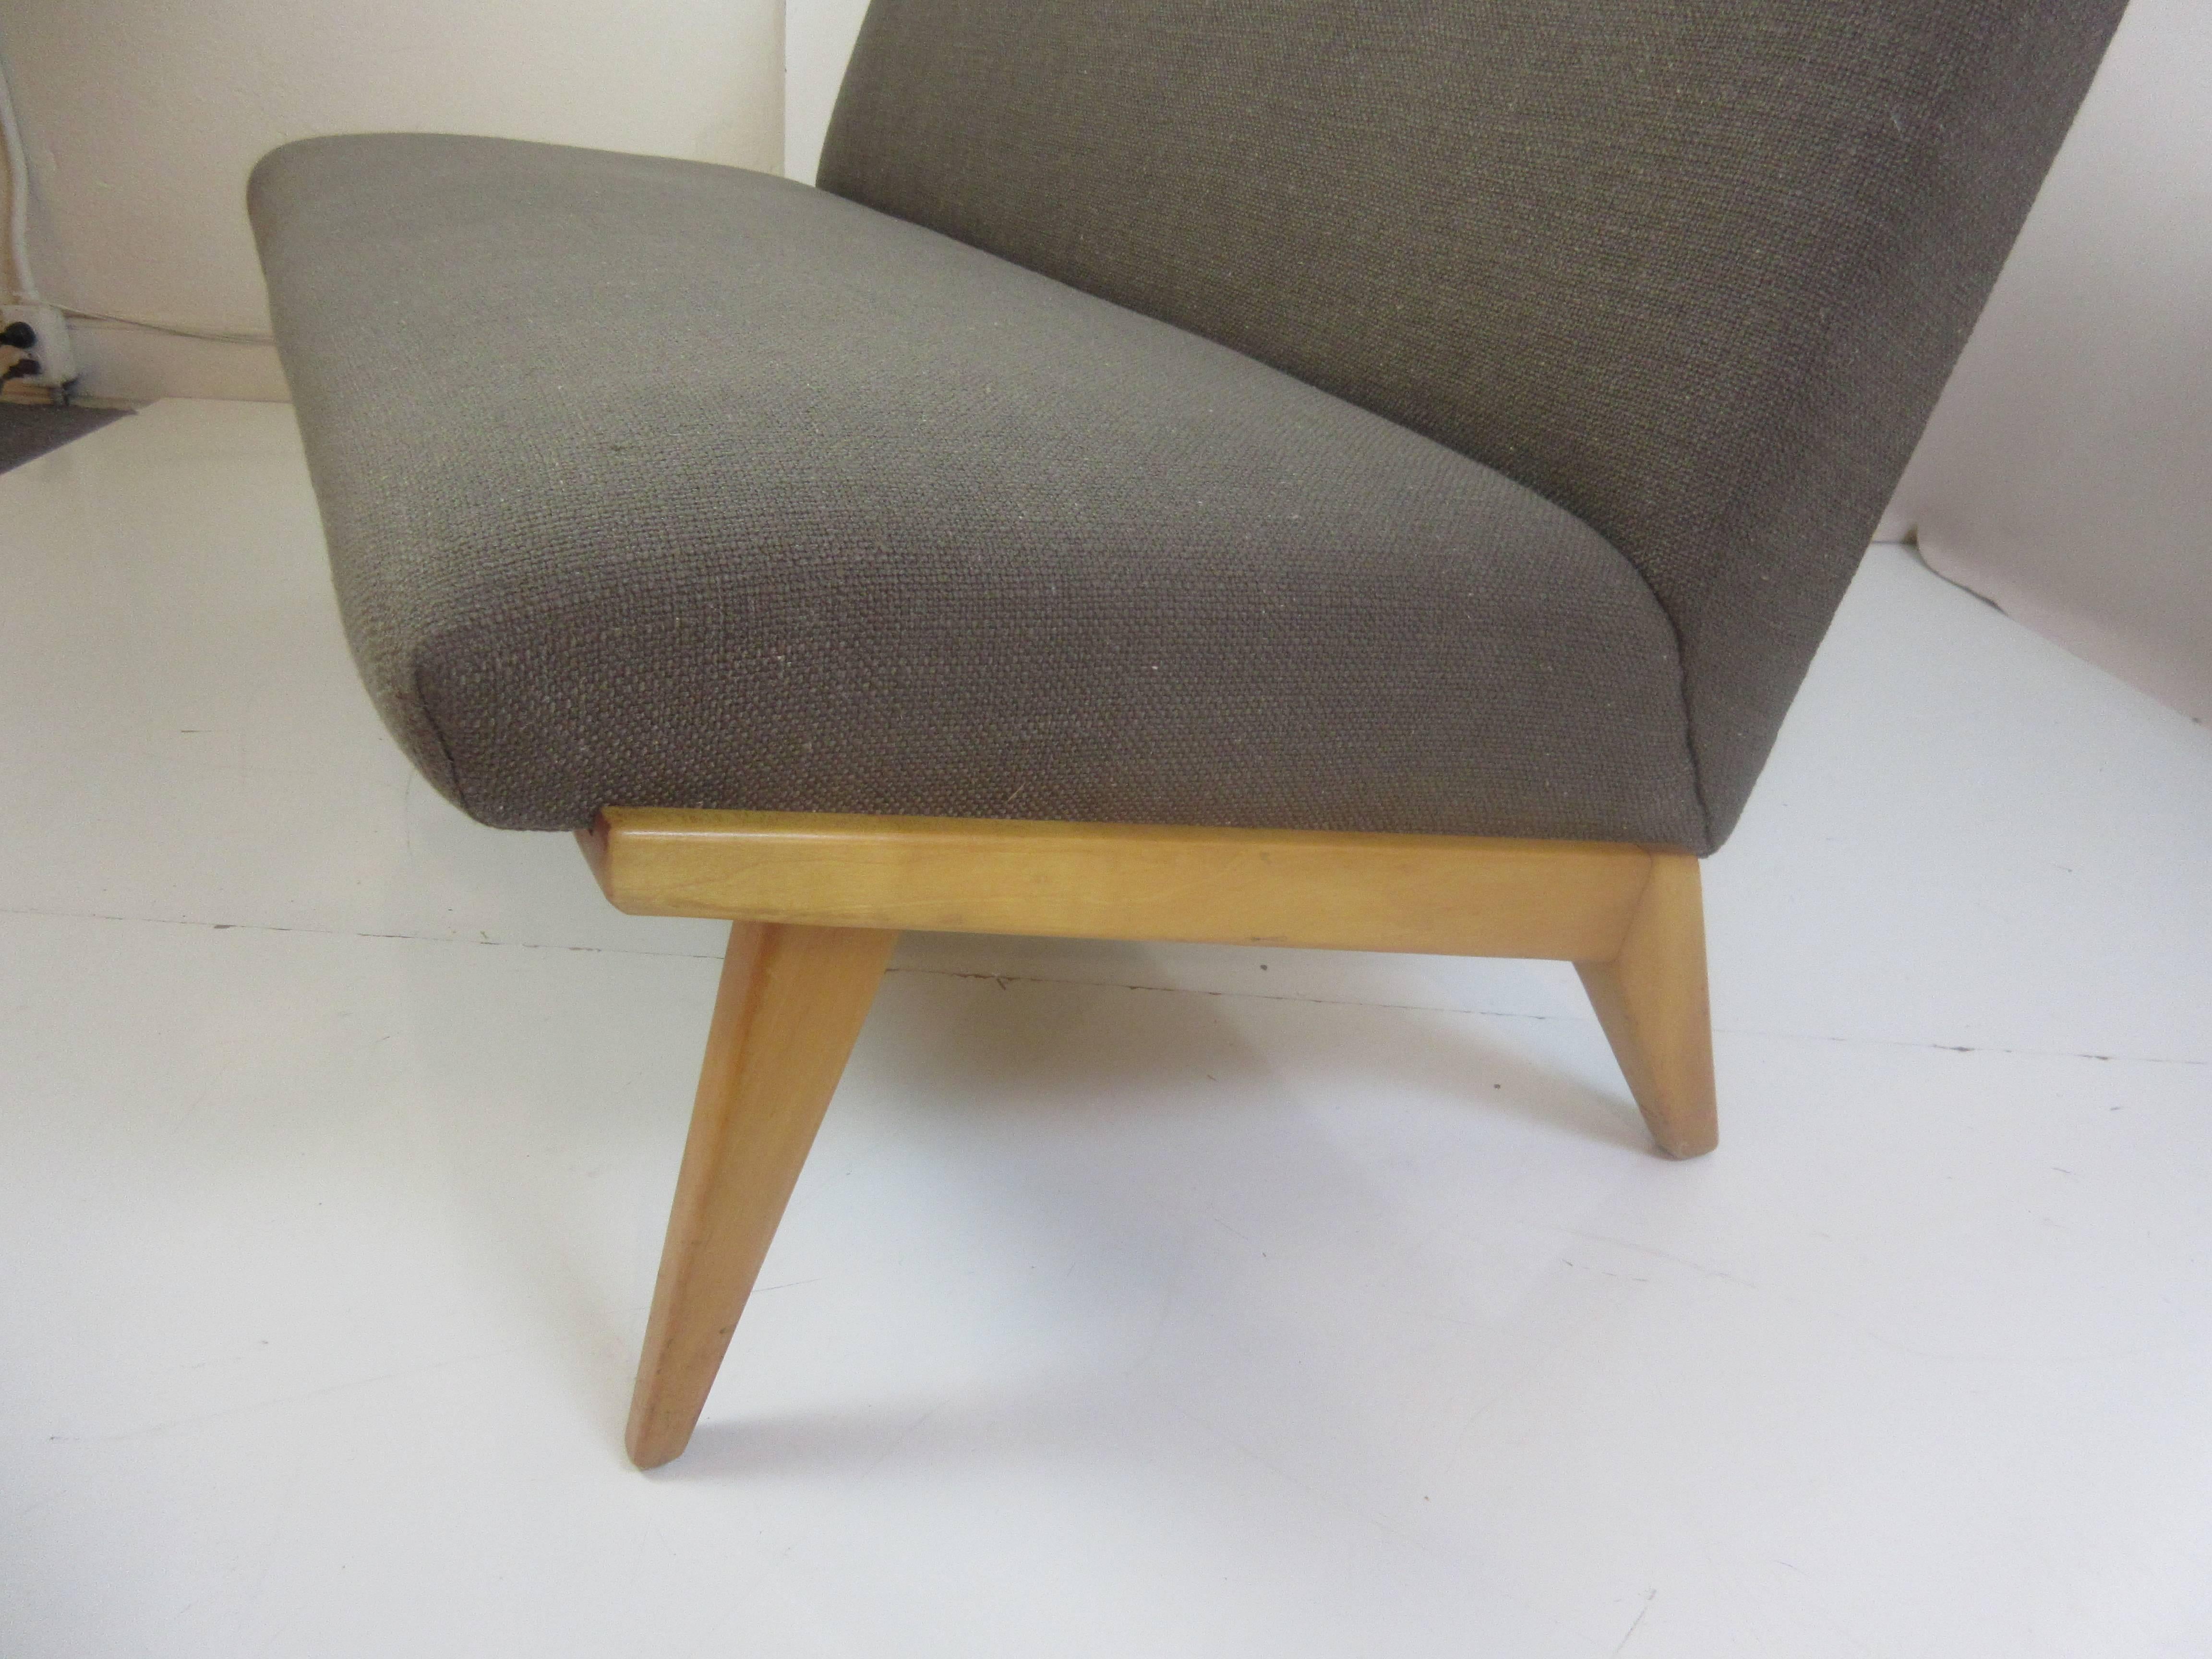 Nice scaled loveseat or settee designed by Jens Risom for Knoll in the early 1950s. This example has been reupholstered in a brown nubby fabric.